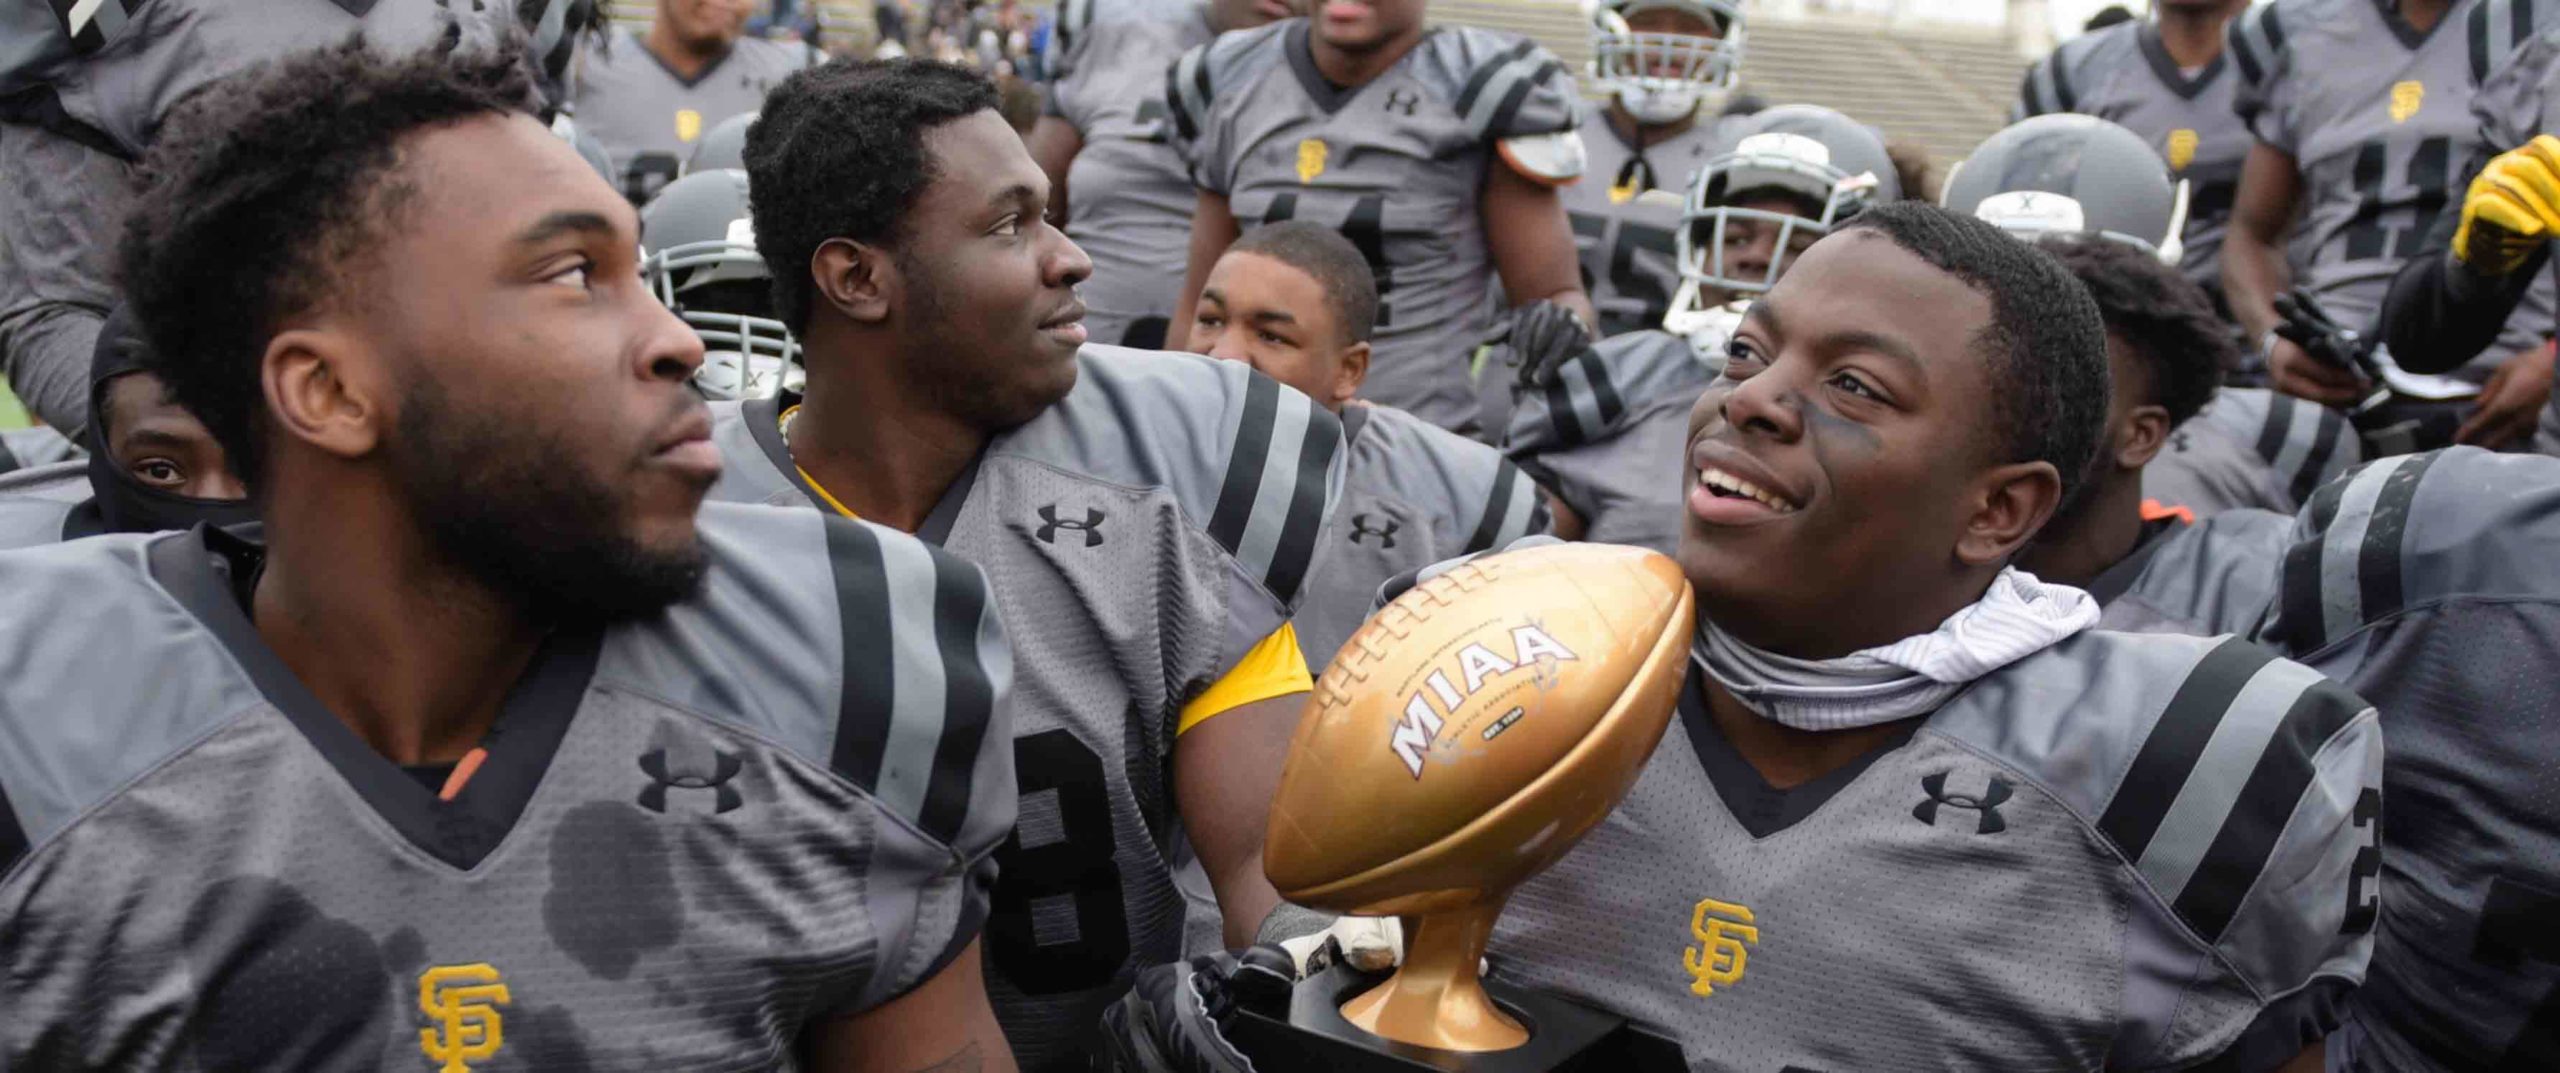 St. Frances Academy rolls to another A Conference football title - Catholic Review